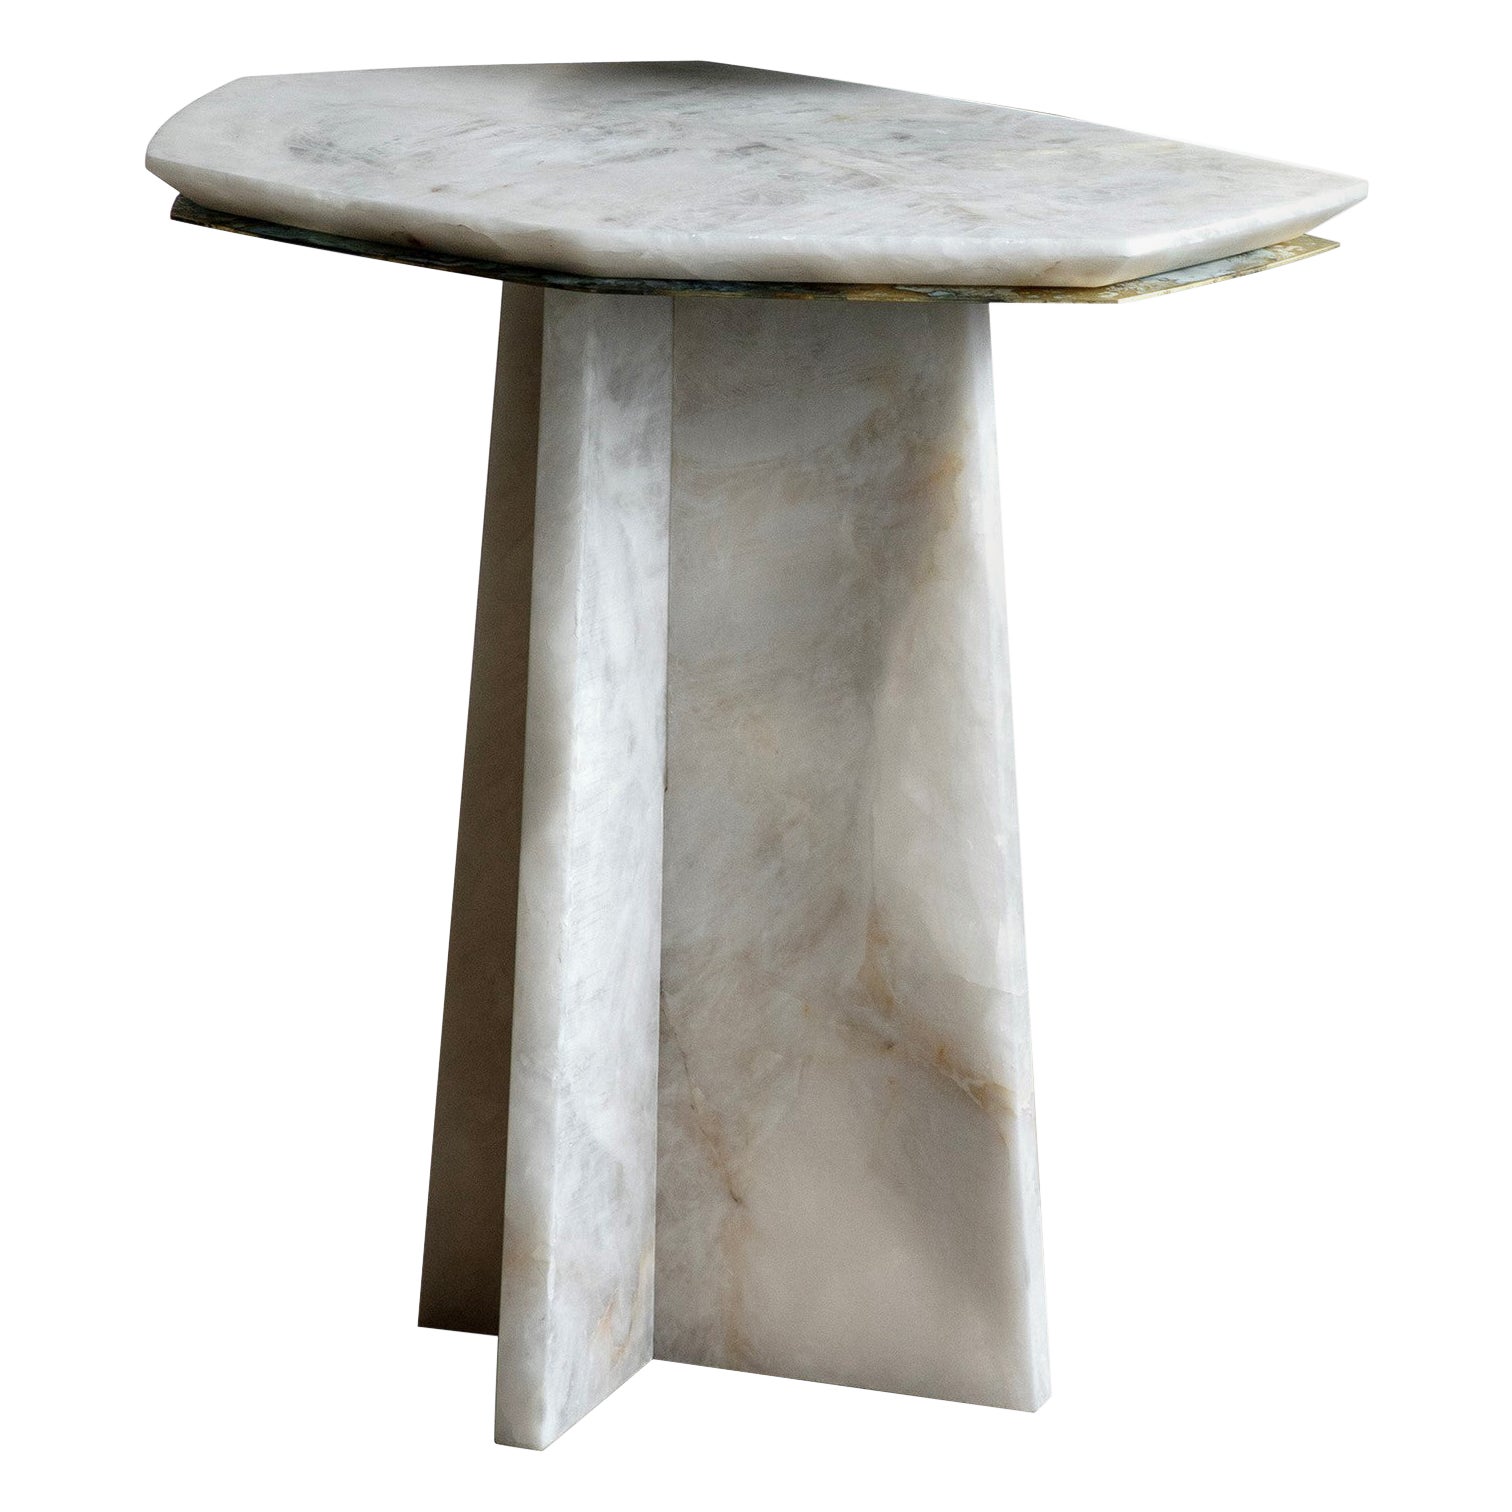 Small Geometrik Cantilever Coffee Table by Atra Design For Sale